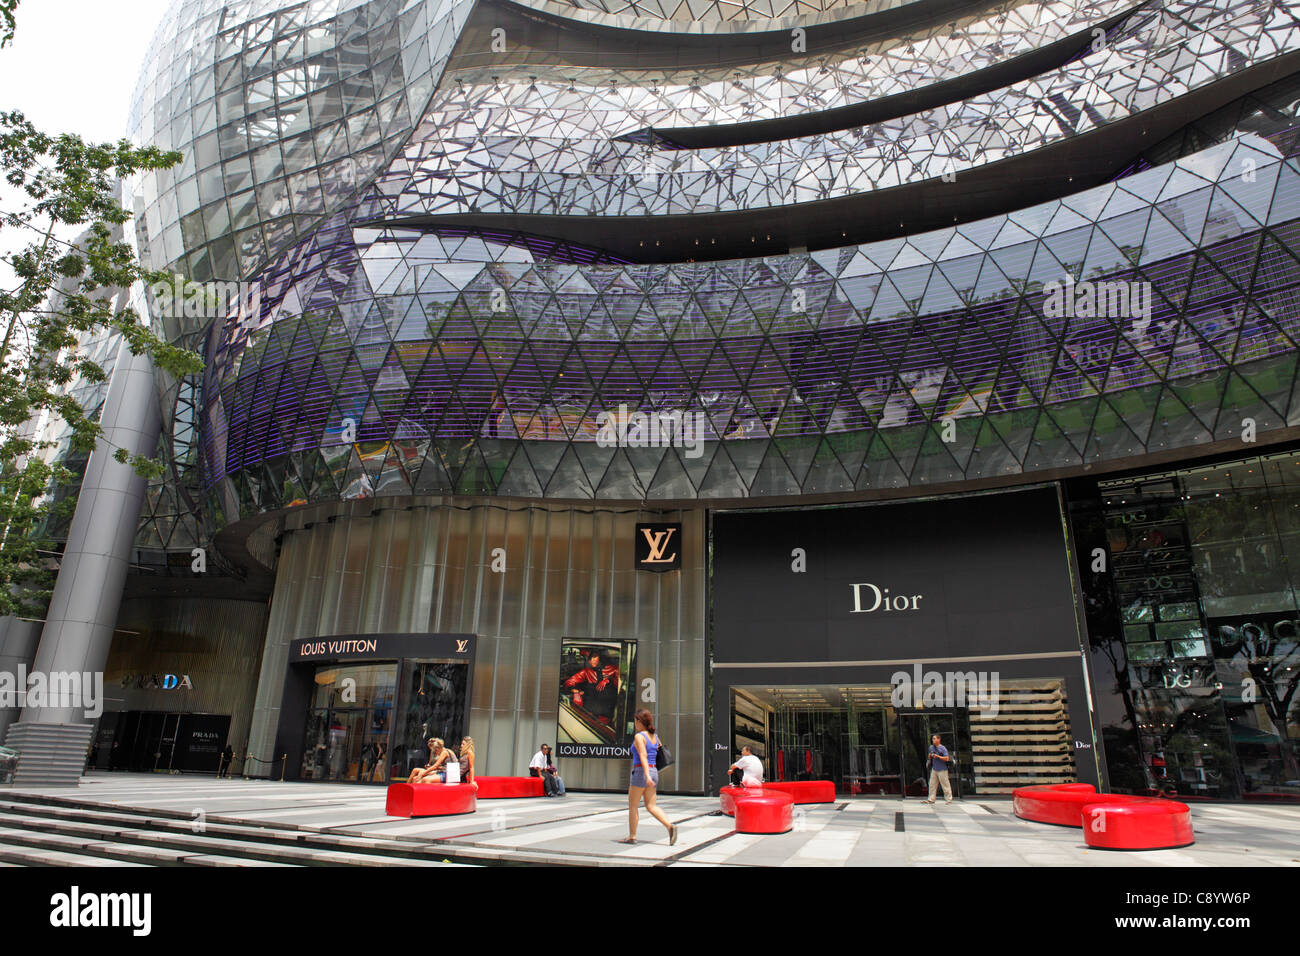 Ion Orchard Shopping Center, Orchard Road, Singapore Editorial Stock Photo  - Image of recognized, outletsin: 69749683